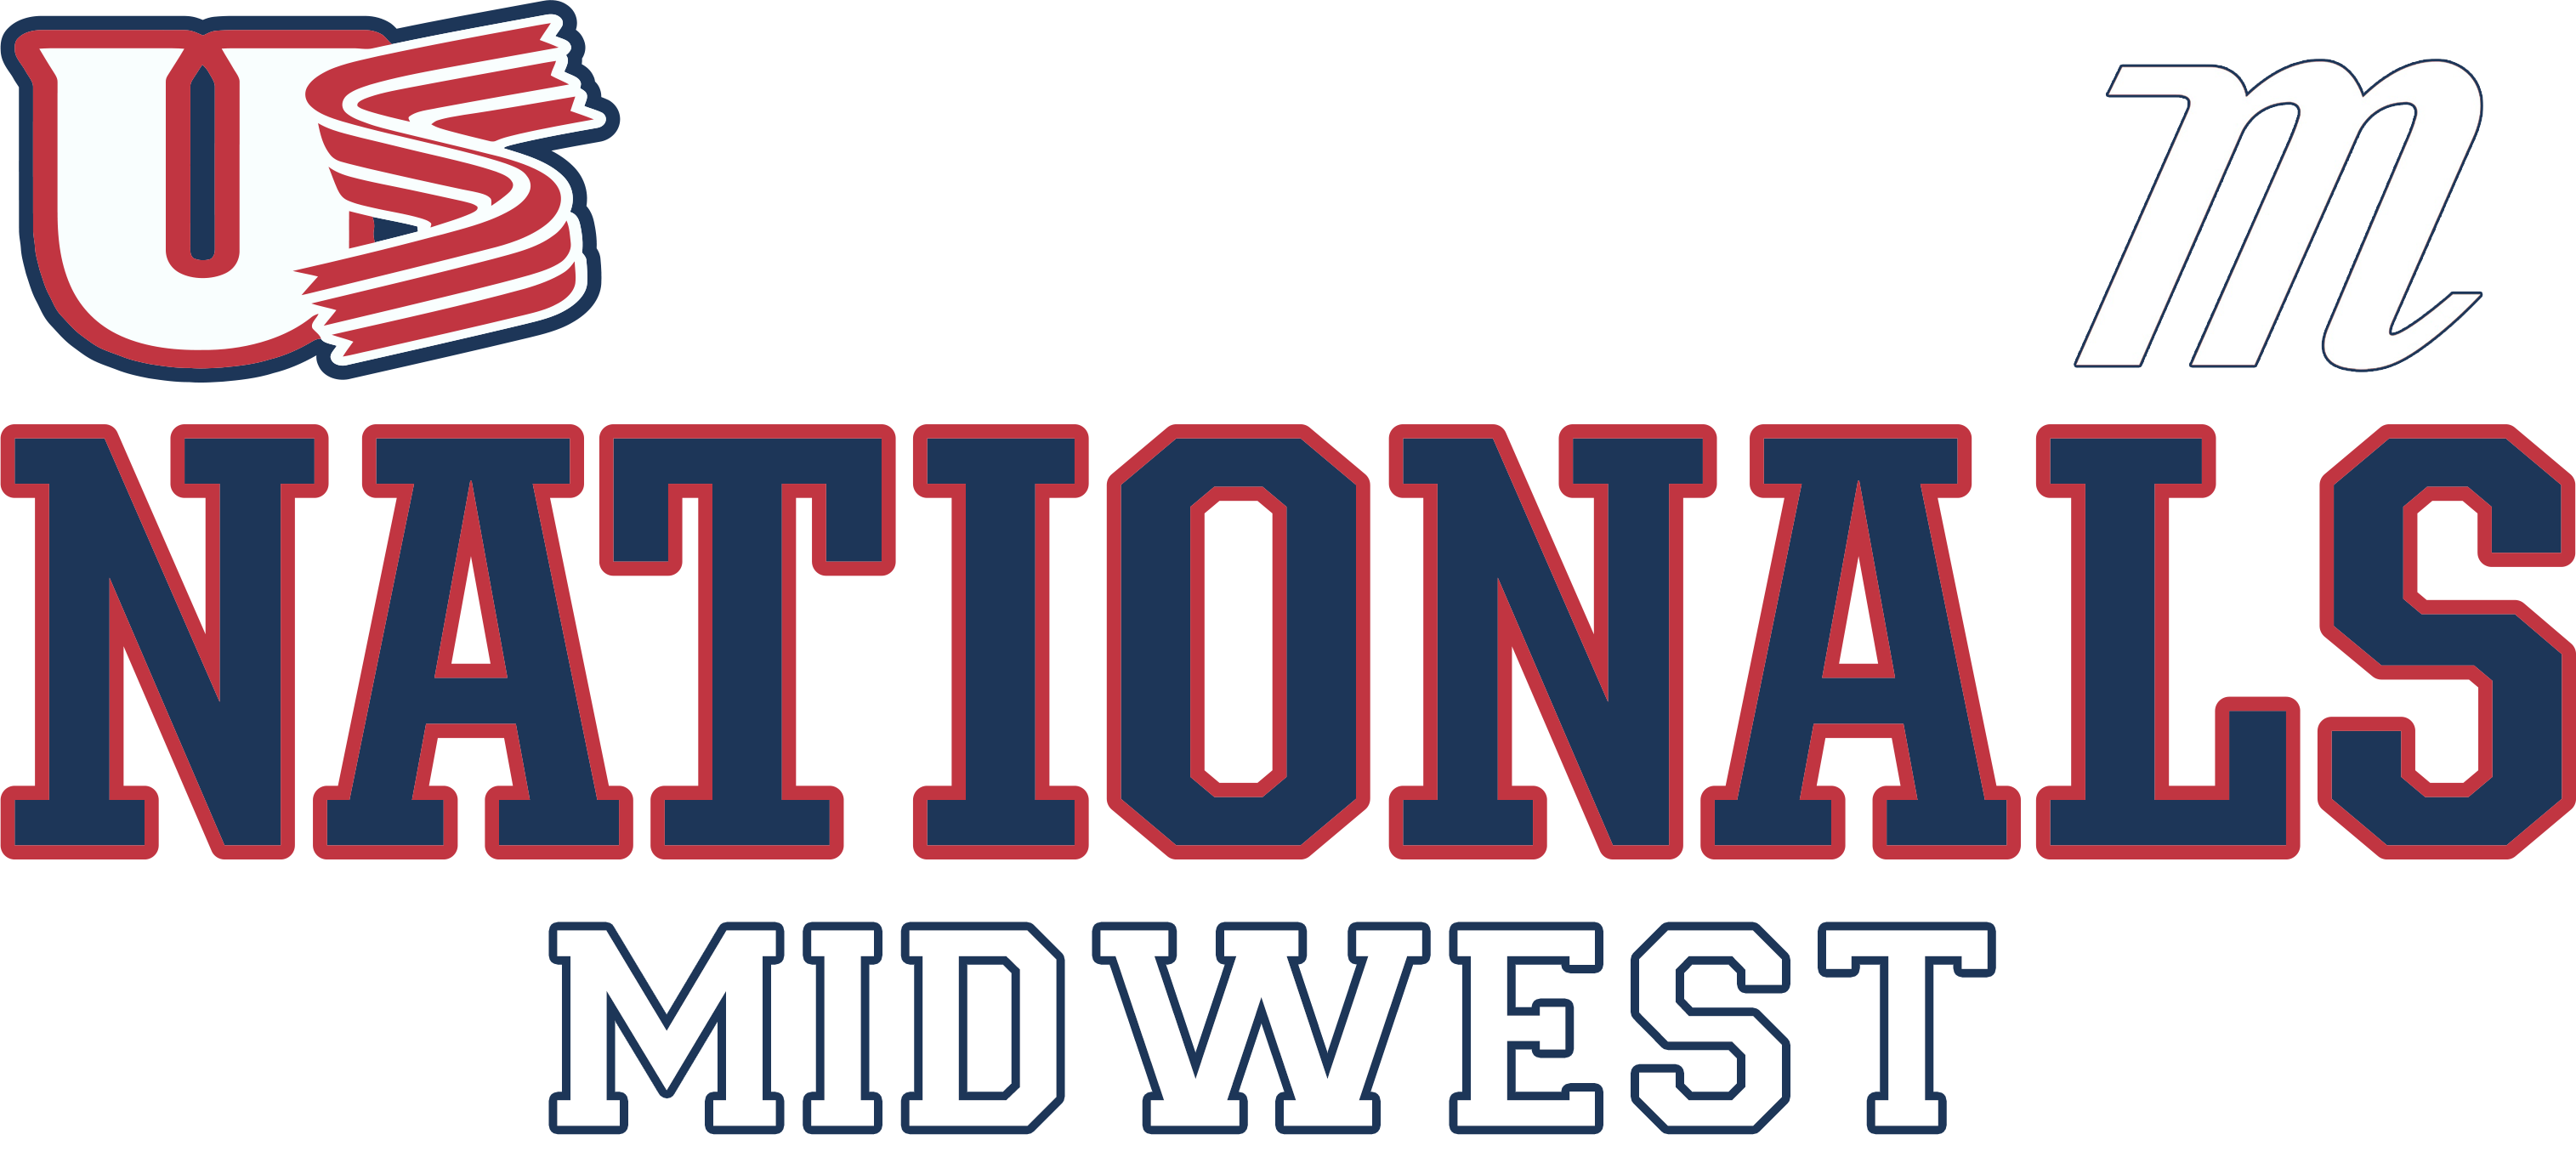 US Nationals Midwest Baseball Club